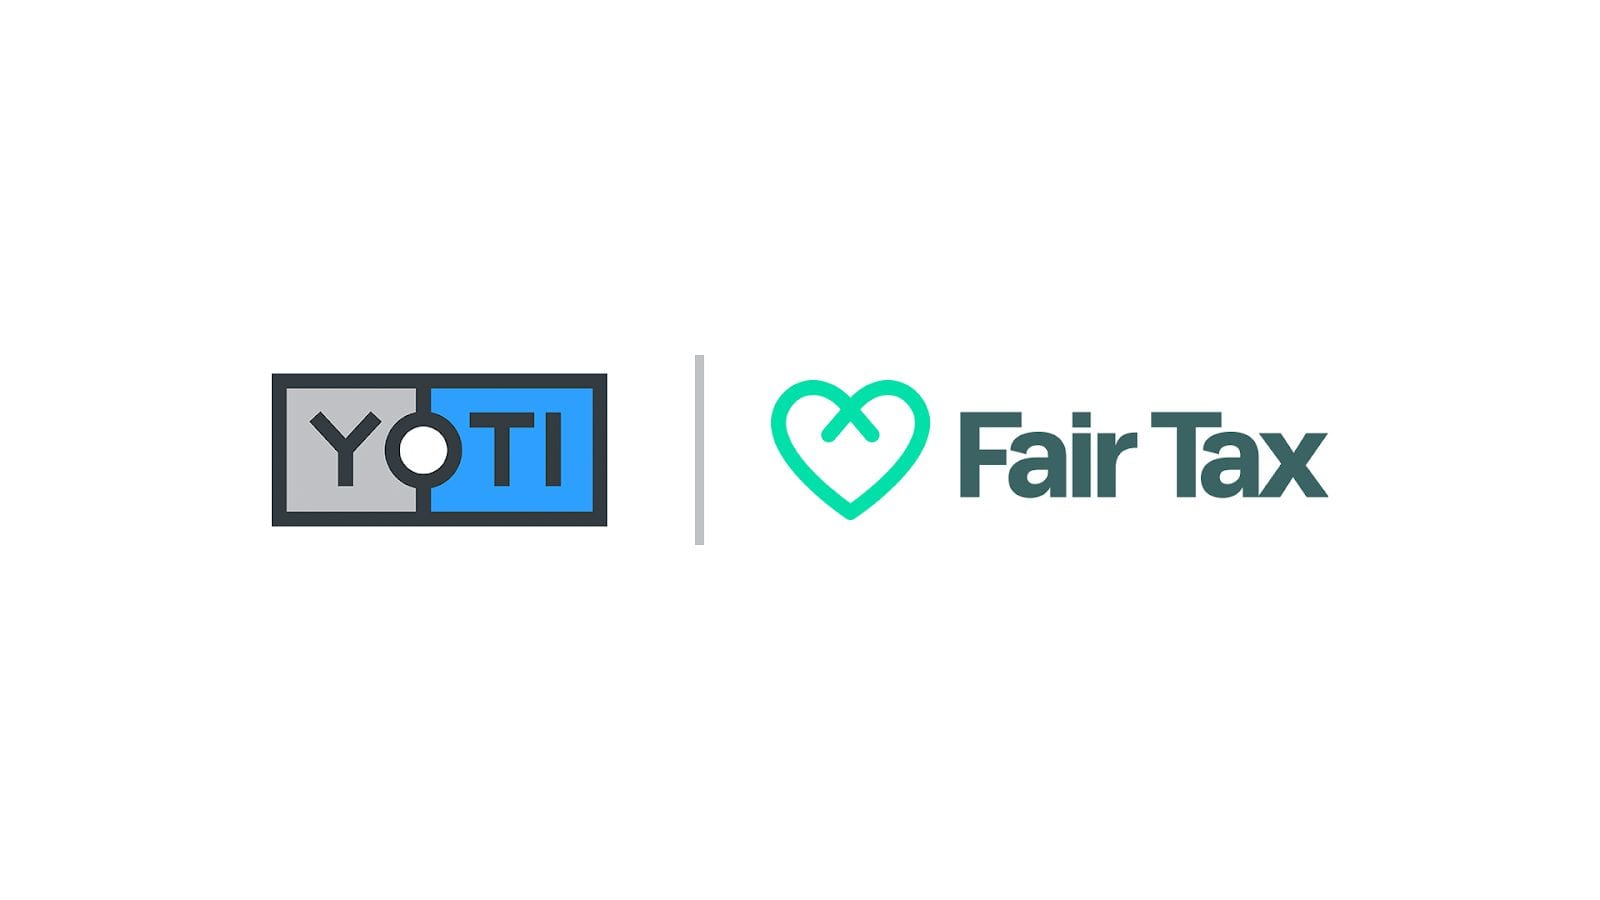 Yoti recognised as a Fair Tax Mark organisation